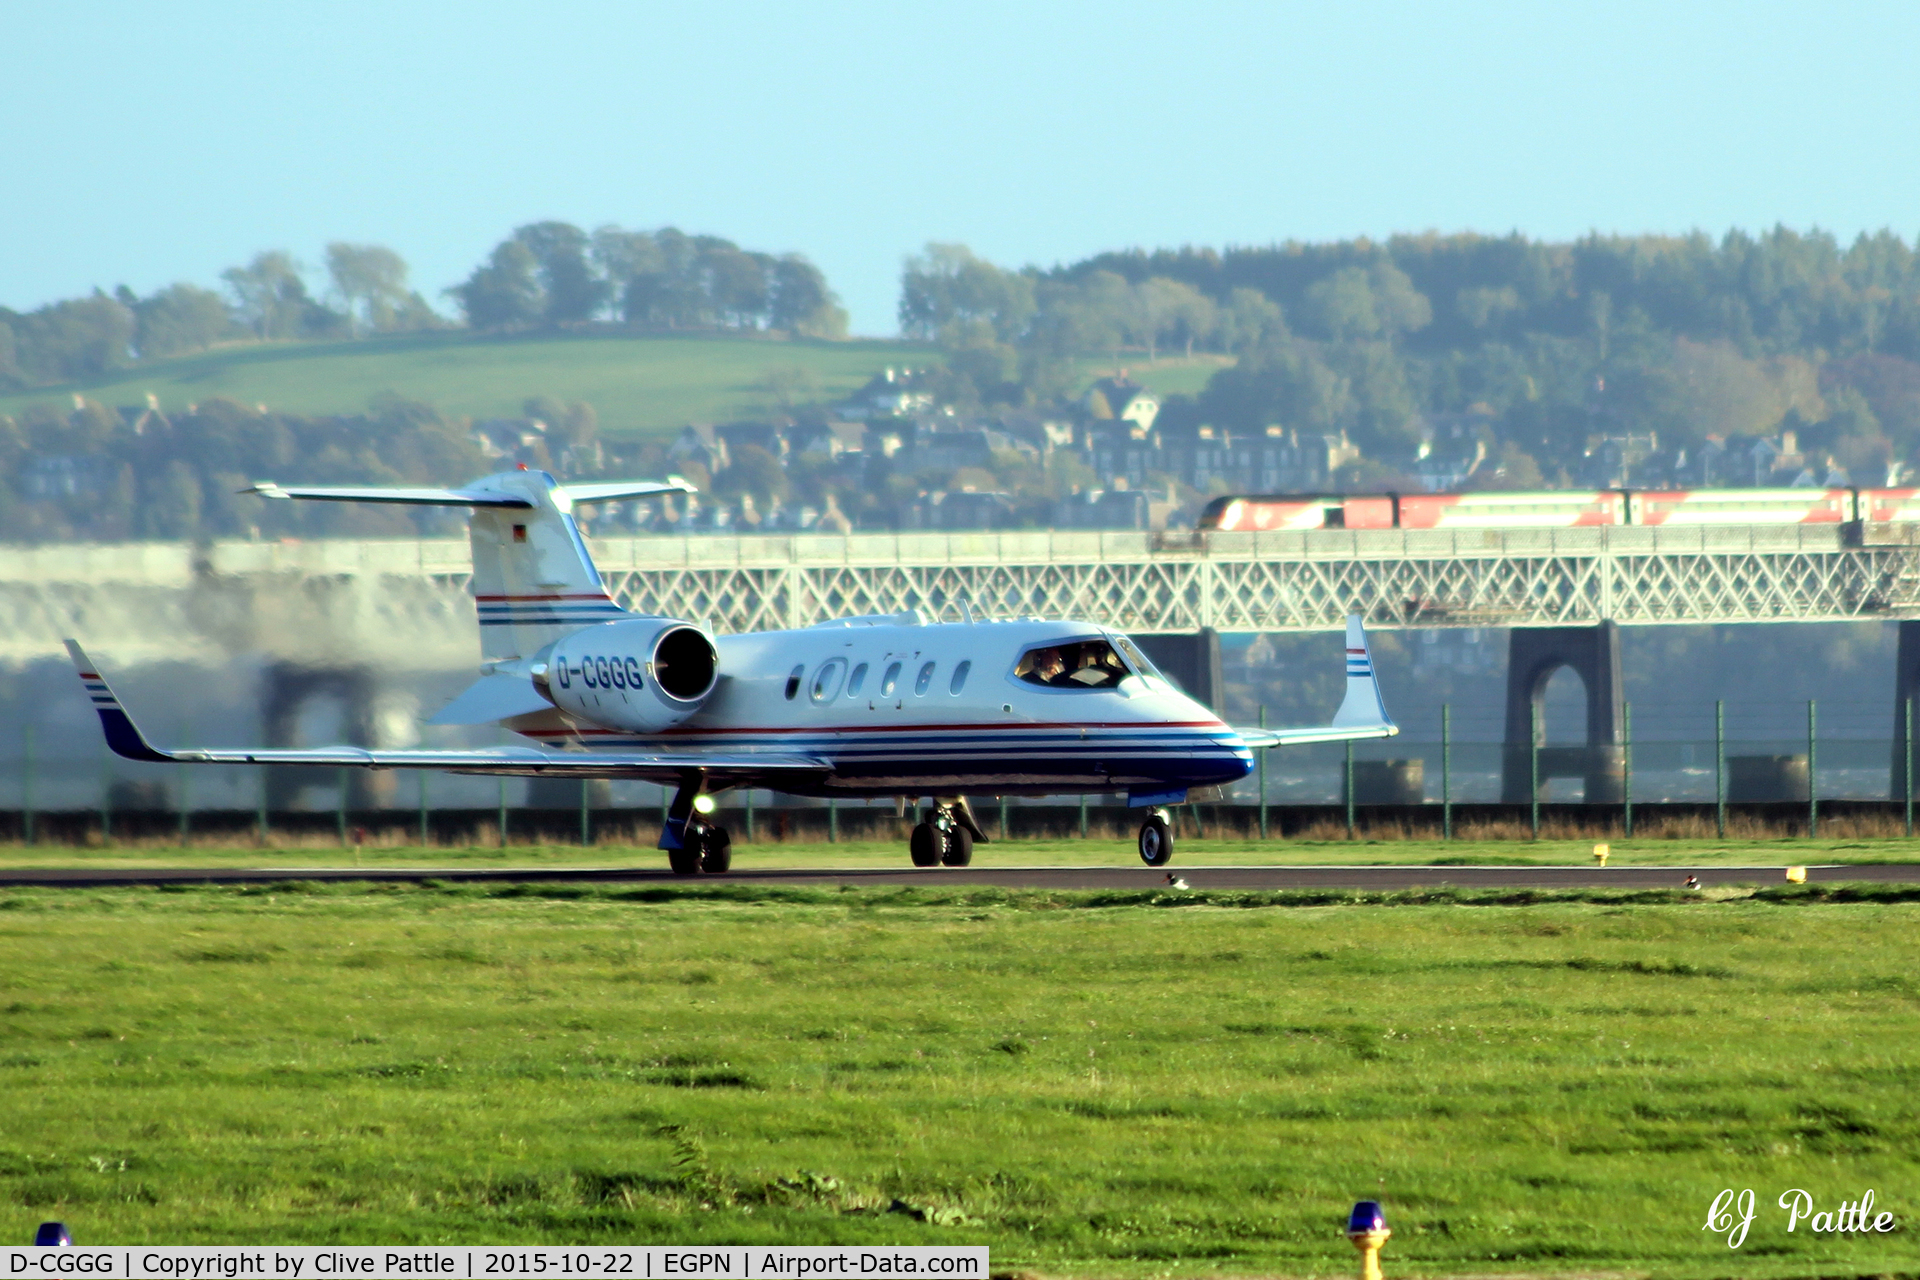 D-CGGG, 2001 Learjet 31A C/N 31A-227, Take-off roll at Dundee Riverside Airport EGPN